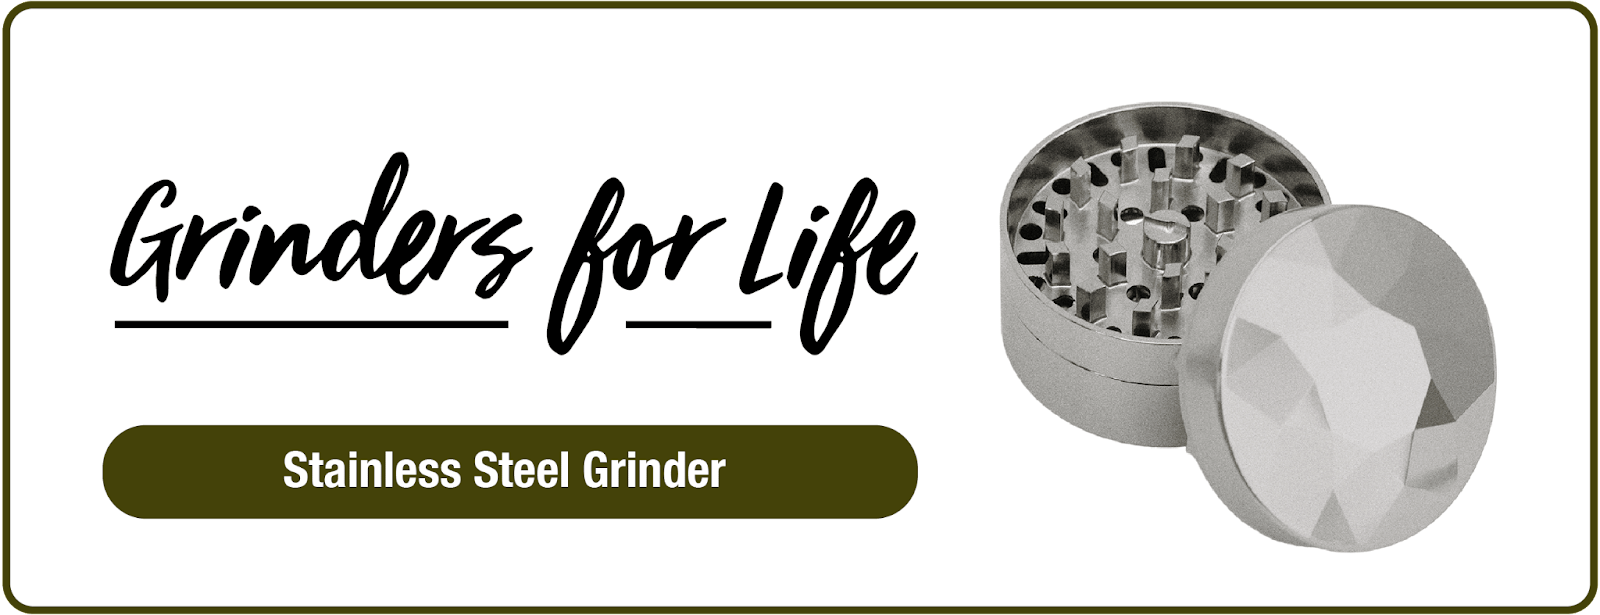 8 Best Weed Grinders of 2023 Available Today: Tried & Tested